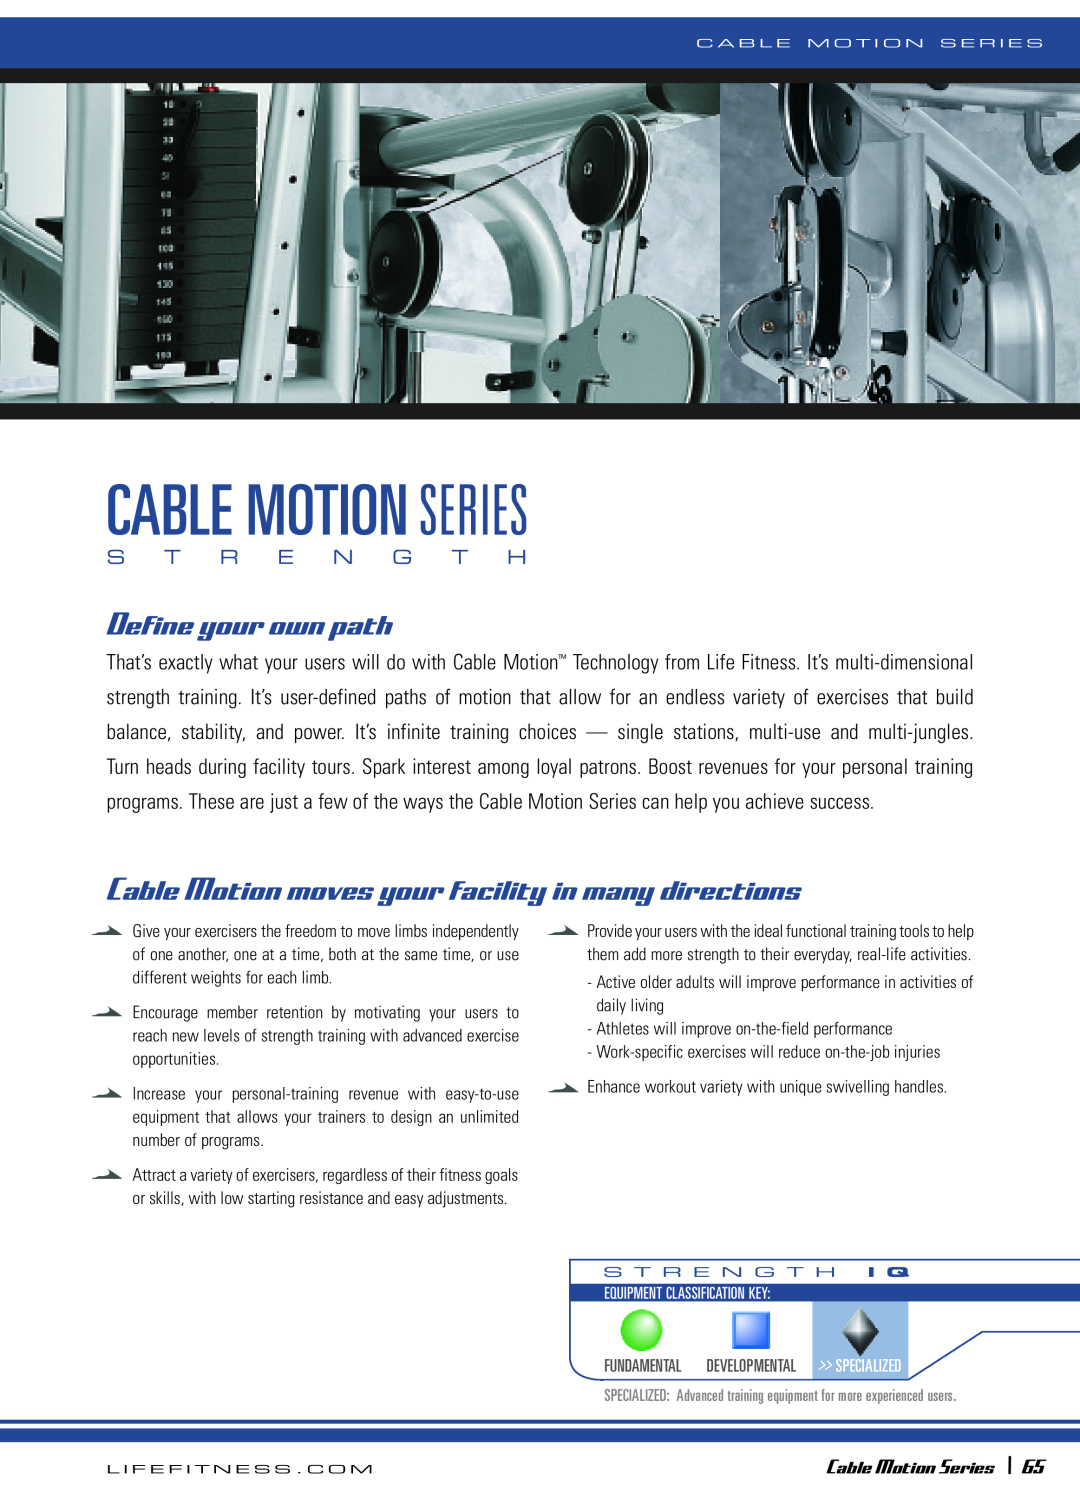 Life Fitness 64 manual Cable Motion Series, Define your own path, Cable Motion moves your facility in many directions 